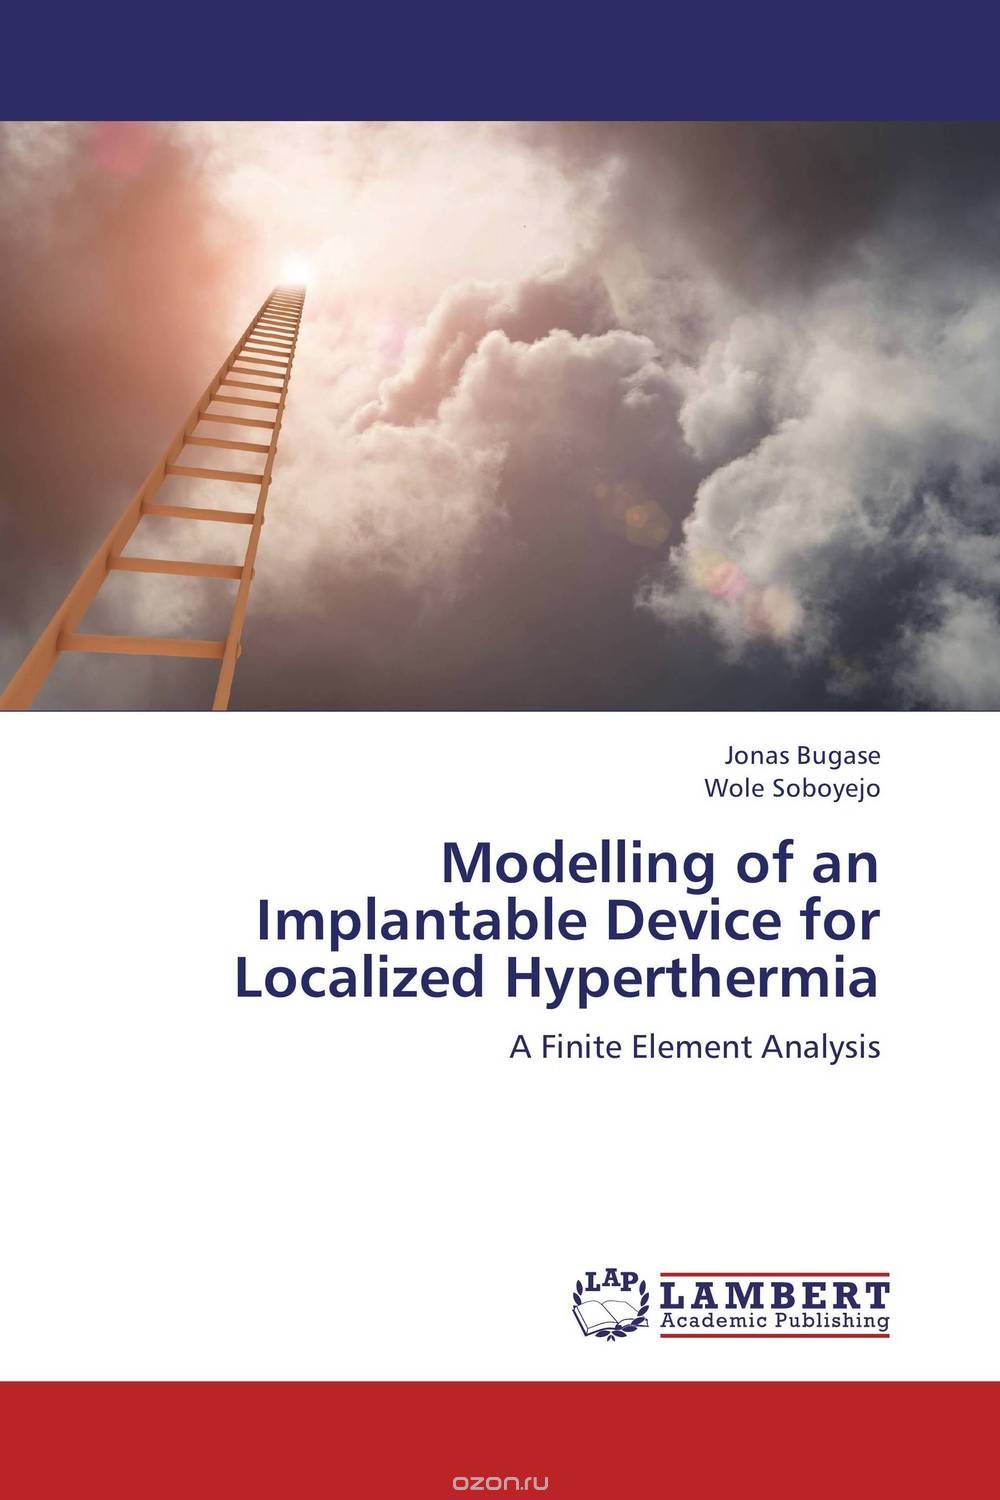 Скачать книгу "Modelling of an Implantable Device for Localized Hyperthermia"